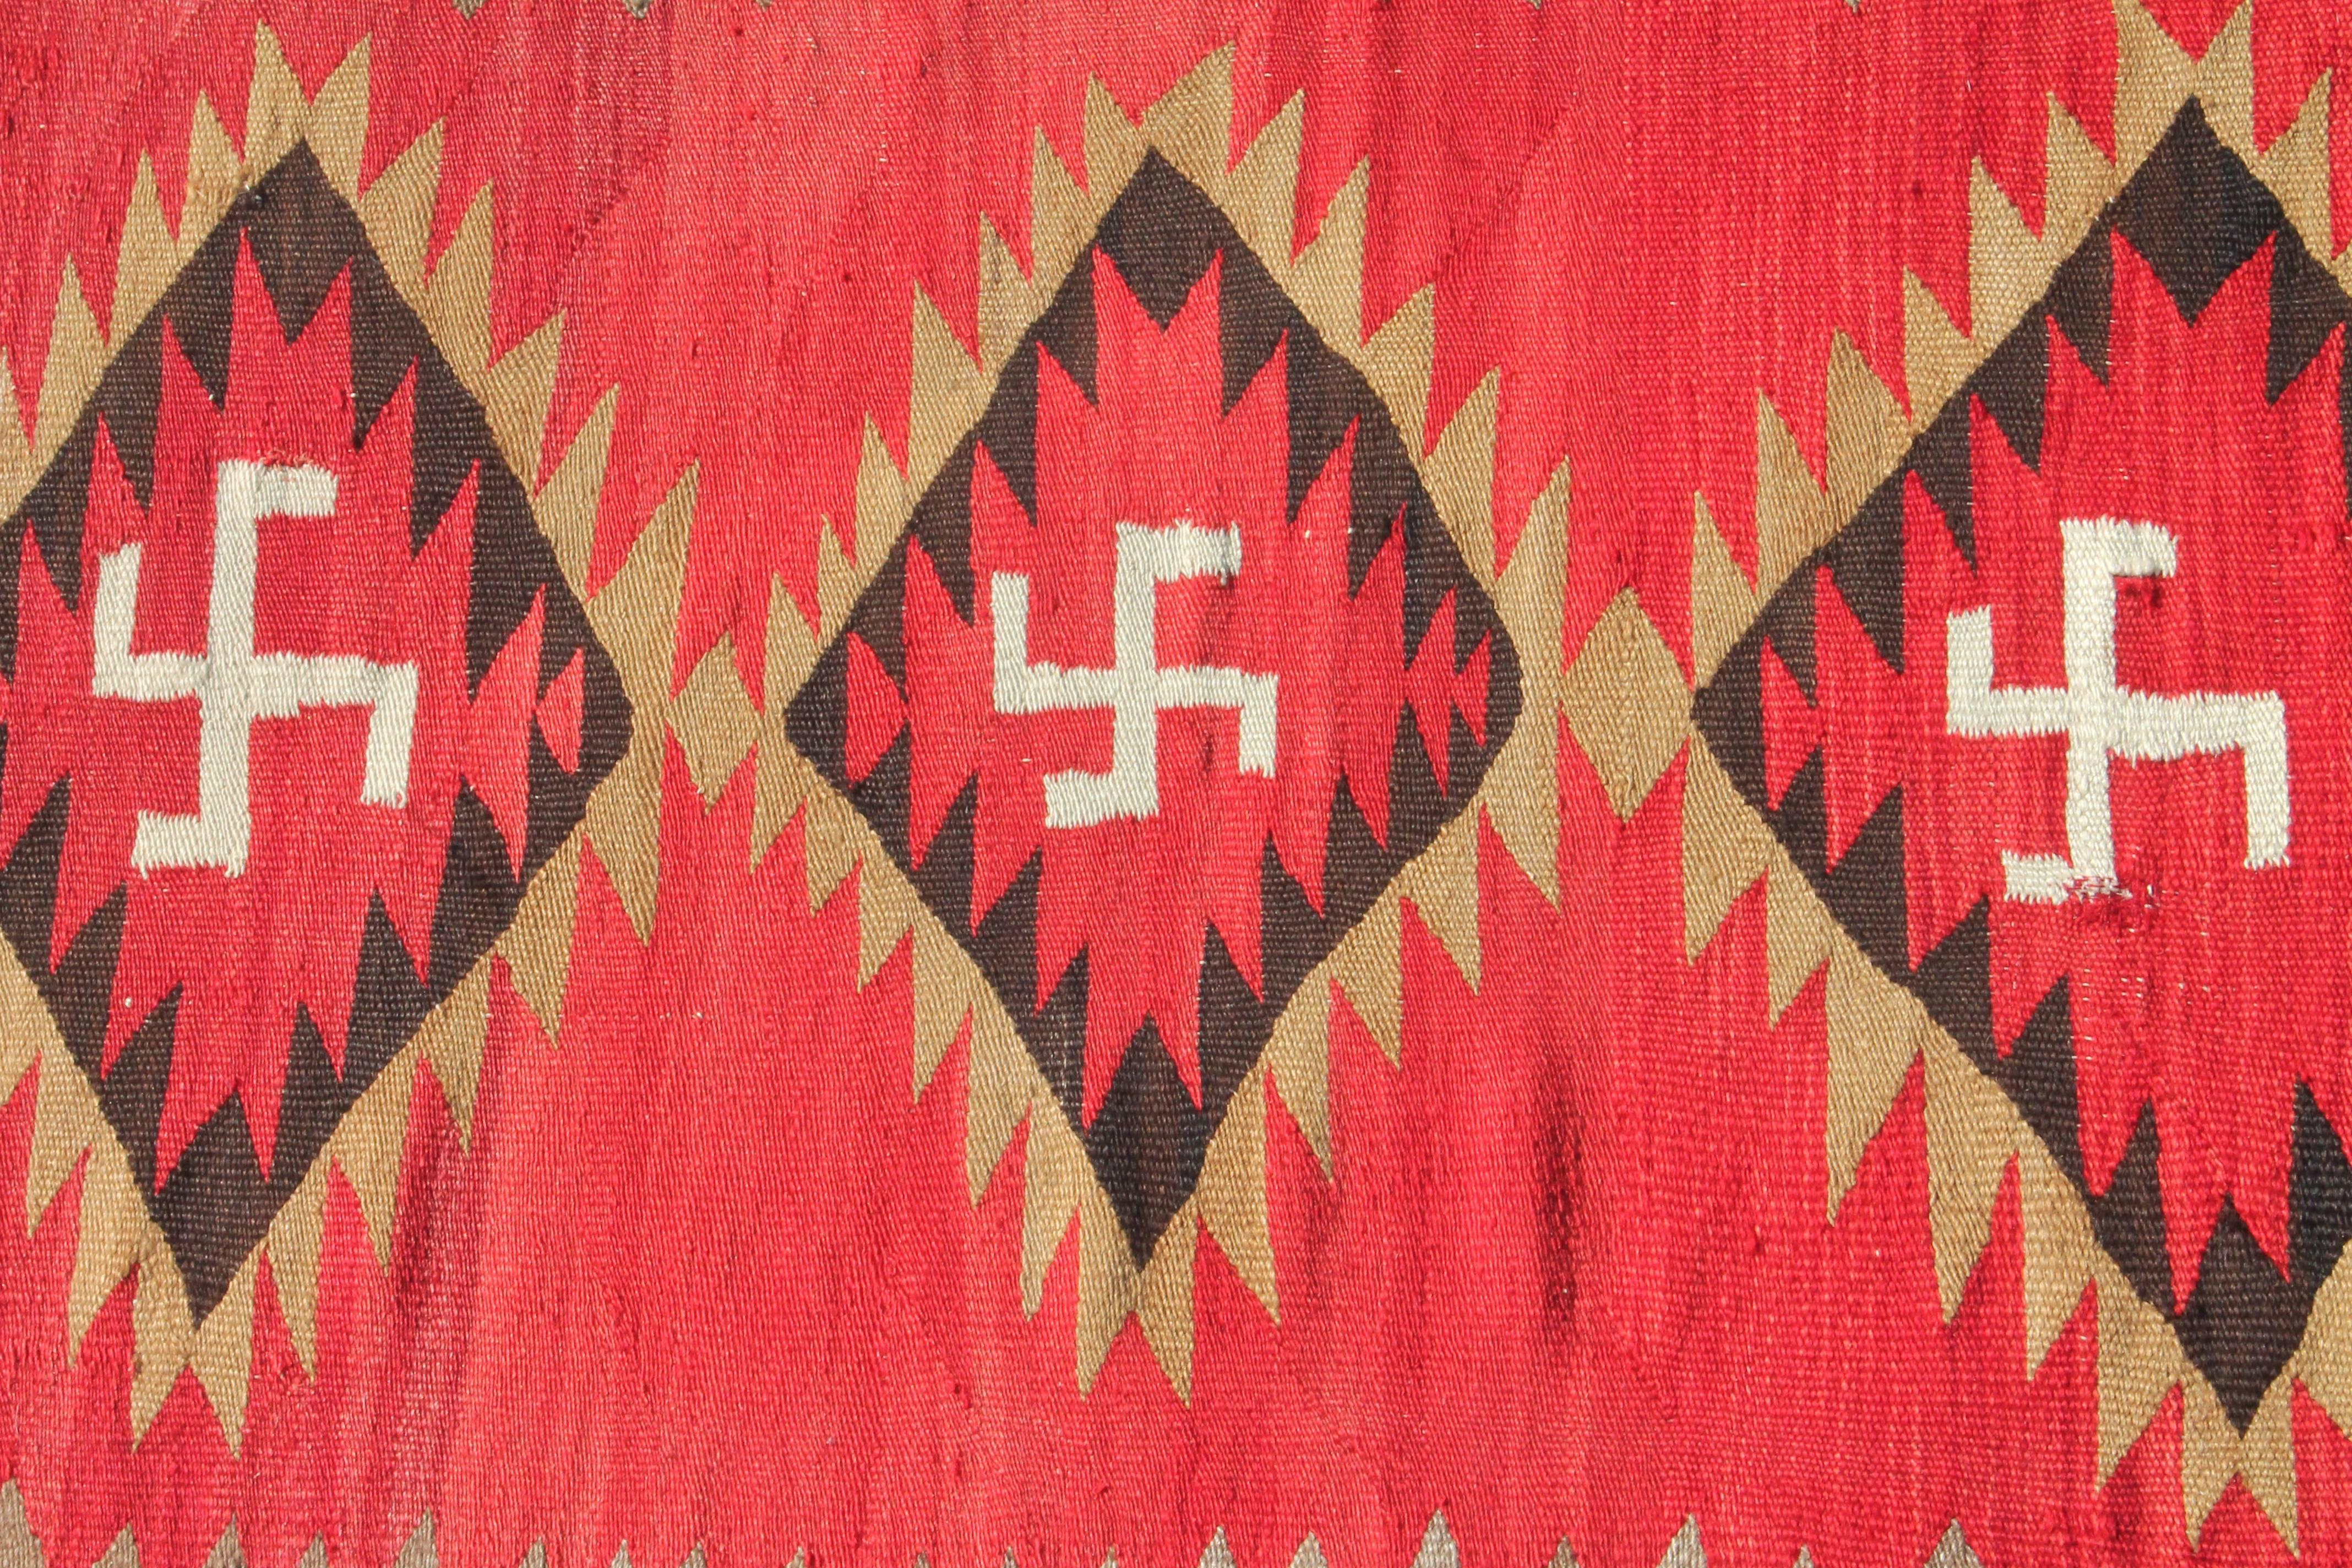 Early Navajo transitional weaving in good condition. This item shows minor wear consistent with age and use. The three central diamonds have a 